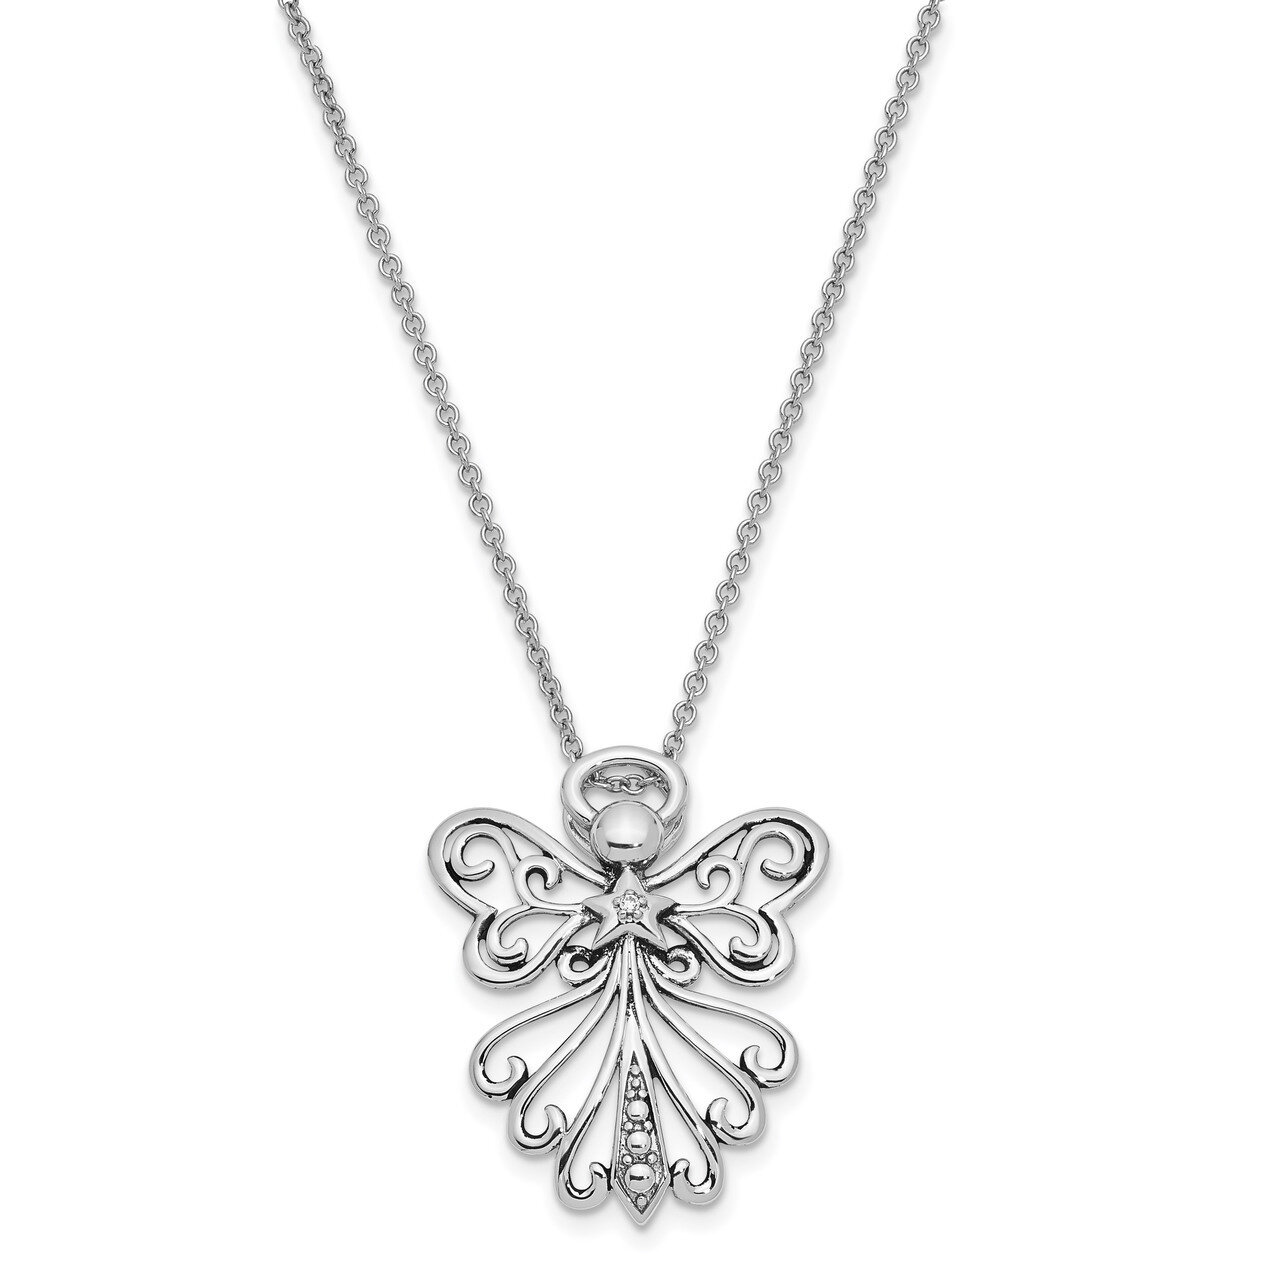 Antiqued Angel, Heavenly Angel 18 Inch Necklace Sterling Silver CZ Diamond QSX666